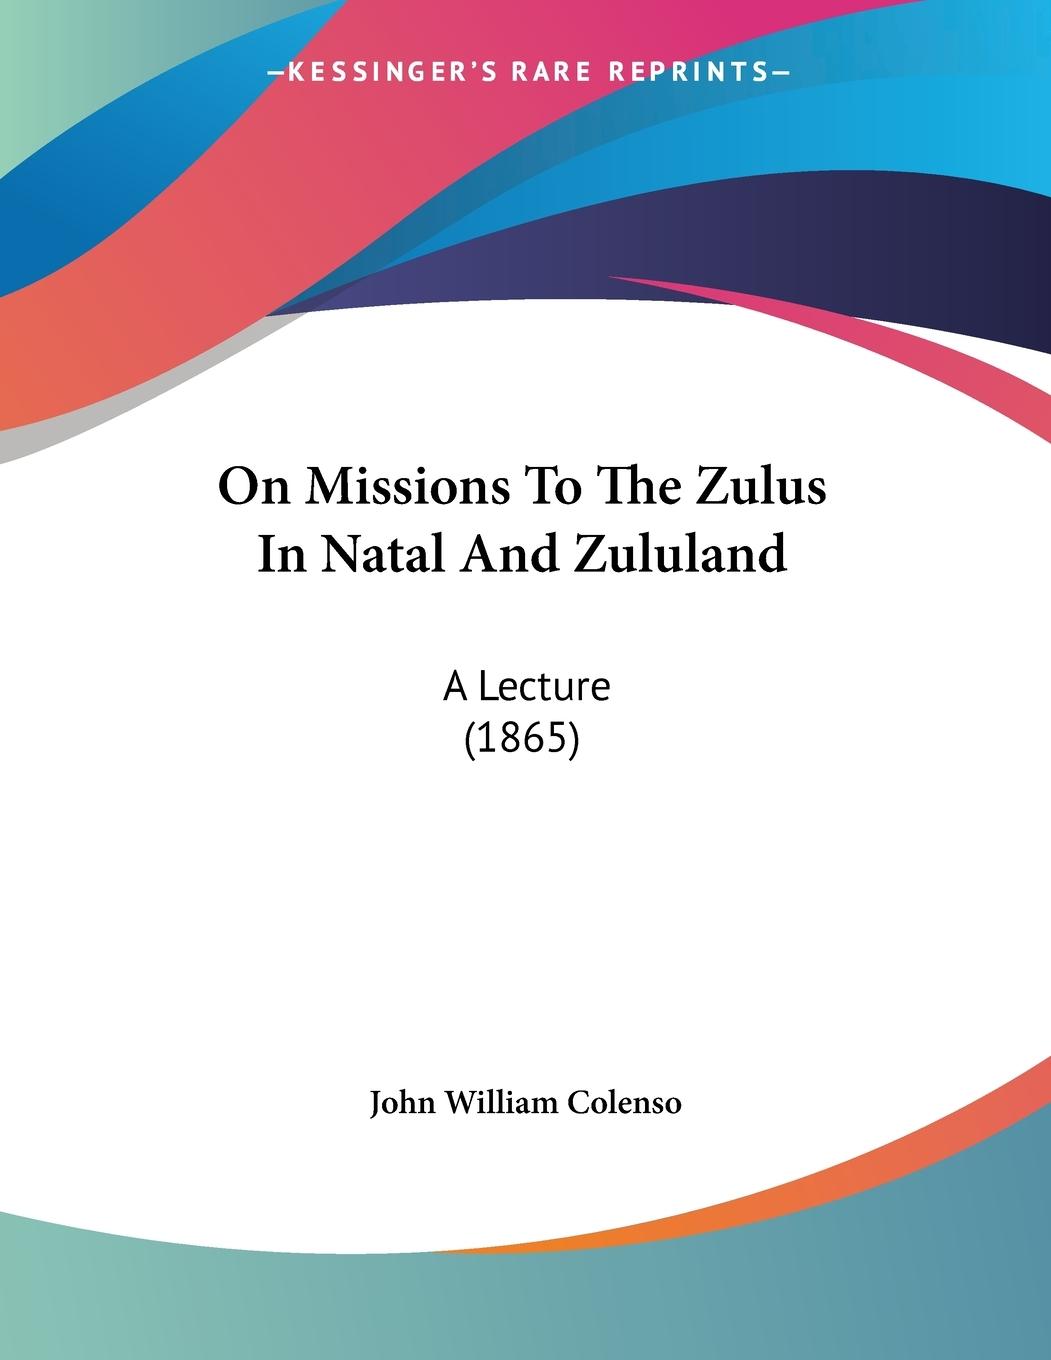 On Missions To The Zulus In Natal And Zululand - Colenso, John William